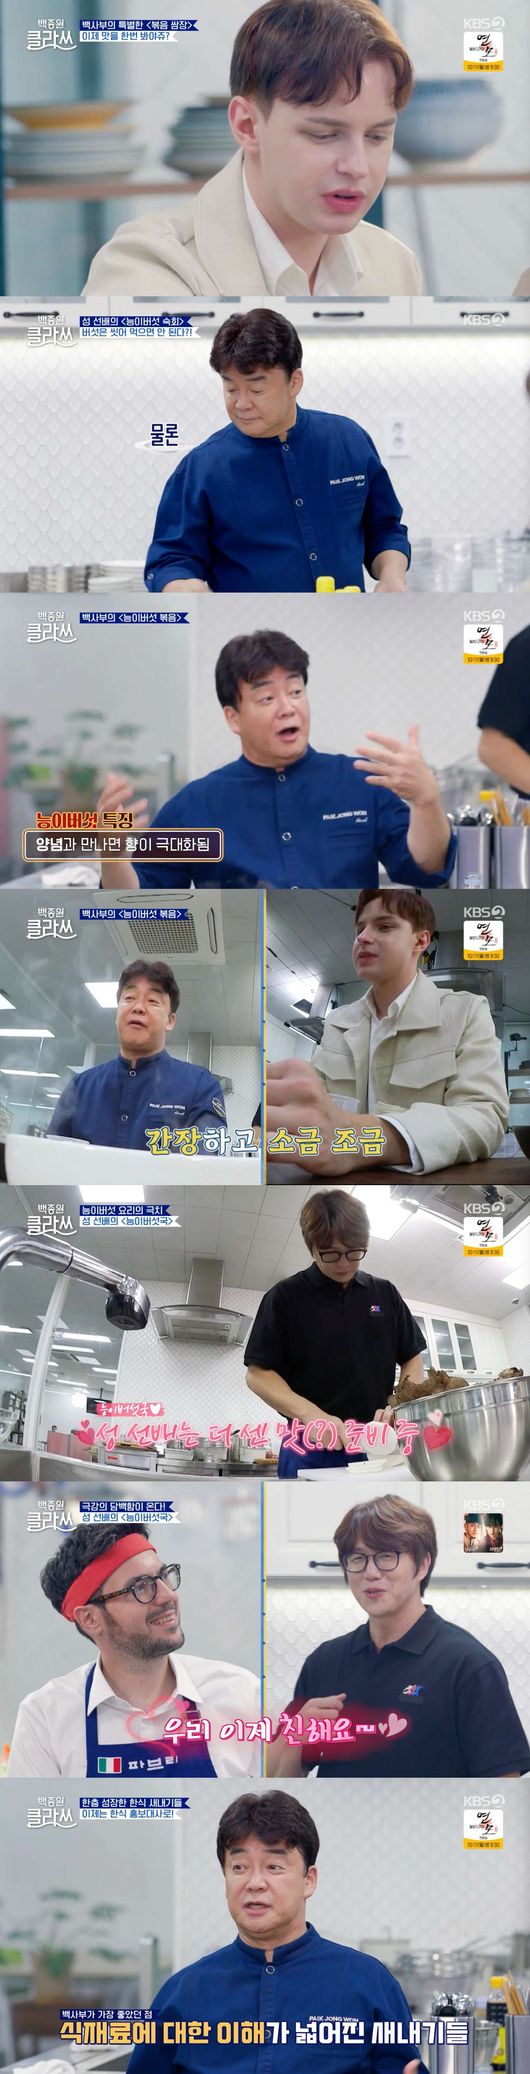 While cooking research has enjoyed the last dinner with the first Korean newcomers, Baek Jong-won has been honest about why he was late for his wife Sooo-jin and marriage.On the afternoon of the 4th, KBS 2TV Baek Jong-won Clath depicted the Baek Jong-won and Sung Si-kyung who held a delicious thank-you party for global newbies.On this day, Baek Jong-won Clath Baek Jong-won visited the Baek Jong-won research and development room, which is the space where the first Korean newbies and their own special recipes are born.Ill make you a special dish for you whove been struggling for a while, its a party of comfort, Baek Jong-won said.Baek Jong-won Clath Baek Jong-won said, When I meet a lot of foreign people and ask about Korean, which is the most memorable.I will let you know the stir-fried ssamjang which is an upgrade of stir-fried red pepper paste.The second dish is to try Stir-Fried Pork with Chicken for those who do not eat pork. Baek Jong-won Clath Baek Jong-won and Sung Si-kyung directed Matthew, who prepared Apple pie for him, Matthew is good at cooking and Cake is good at baking.Its the best grooming, he said, praising Matthews versatility.I cook cooking, but its not a good-looking thing, said Baek Jong-won. I baked Cake and cooked well, but I was late.People have to be handsome, she quipped numbly.Sung Si-kyung then asked, Did you marriage late because you were ugly? And Baek Jong-won replied, Uh, and laughed.However, when the global newcomers praised the visuals of Baek Jong-won, saying, I am cute and I am charming. Baek Jong-won said, I am not ugly.Why do you say that? I am not handsome, I am not ugly, but I am just in the middle of the middle of the stage. Matthew, who heard this, said, If you are as attractive as your master, you look handsome.Since then, Baek Jong-won Clath Valeria Fabrizi, Matthew and Amy have prepared delicious dishes for the master Baek Jong-won and senior Sung Si-kyung who taught the true taste of Korean they did not know.Valeria Fabrizi, the original handmade author of Baek Jong-won, who tried to reinterpret Korean with his own sense in each class, went to Italy to make makgeolli, make a unit stew, and so on, and showed off the original Michelin chef, octopus fries and octopus mayonnaise sauce.Baek Jong-won, who saw the ingredients prepared by Valeria Fabrizi, was worried about Koreans like it but foreigners are reluctant, but unlike the worries of Baek Jong-won, global newcomers from all over the world started to express their excitement as soon as they ate a bite.Sung Si-kyung, who helped cook, was able to dry the main ingredient before the storm was inhaled and said, Sung Seon-bae, stop eating!Baek Jong-won Clath Sung Si-kyung is a complete restaurant food, Amy said, its really rich in flavor.Its like traveling, Baek Jong-won said, Its so good to have a red pepper paste in a tomatoes sauce. Baek Jong-won and Sung Si-kyung also started making special tables for newbies.Baek Jong-won introduced the ingredients of stir-fried ssamjang, saying, I will make special ssamjang, so I will put mushrooms, onions, pumpkin, carrots, onions and peppers.If you put the shattered tofu, you can reduce the spicy taste of the ssamjang.Valeria Fabrizi, who tasted fried ssamjang, said, There is a lot of taste, and Matthew said, The balance of miso and red pepper paste is well balanced.Its more delicious because I eat with vegetables, Ashley Young admired, I want to give my mom.Baek Jong-won Clath Sung Si-kyung cooked with your precious ingredients, the Neungi mushrooms; it will be lightly heated, tasted as a host, and then made into a soup.I want you to know Korean widely, and I have an understanding of the ingredients, so it seems good to be able to reproduce the Korean recipe anywhere.I want you to remember the Korean menu well. Adin said, I was worried that I could not learn at the beginning of cooking.I think I can do well in the future because I know the basics now. Ashley Young also said, First, I can prepare a meal for my Korean mother. Thank you so much.KBS 2TV Baek Jong-won Clath is an entertainment program featuring the Baek Jong-won Korean Clath, which can enjoy Korean with various ingredients from all over the world. It is broadcast every Monday at 8:30 pm.KBS 2TV Baek Jong-won Clath